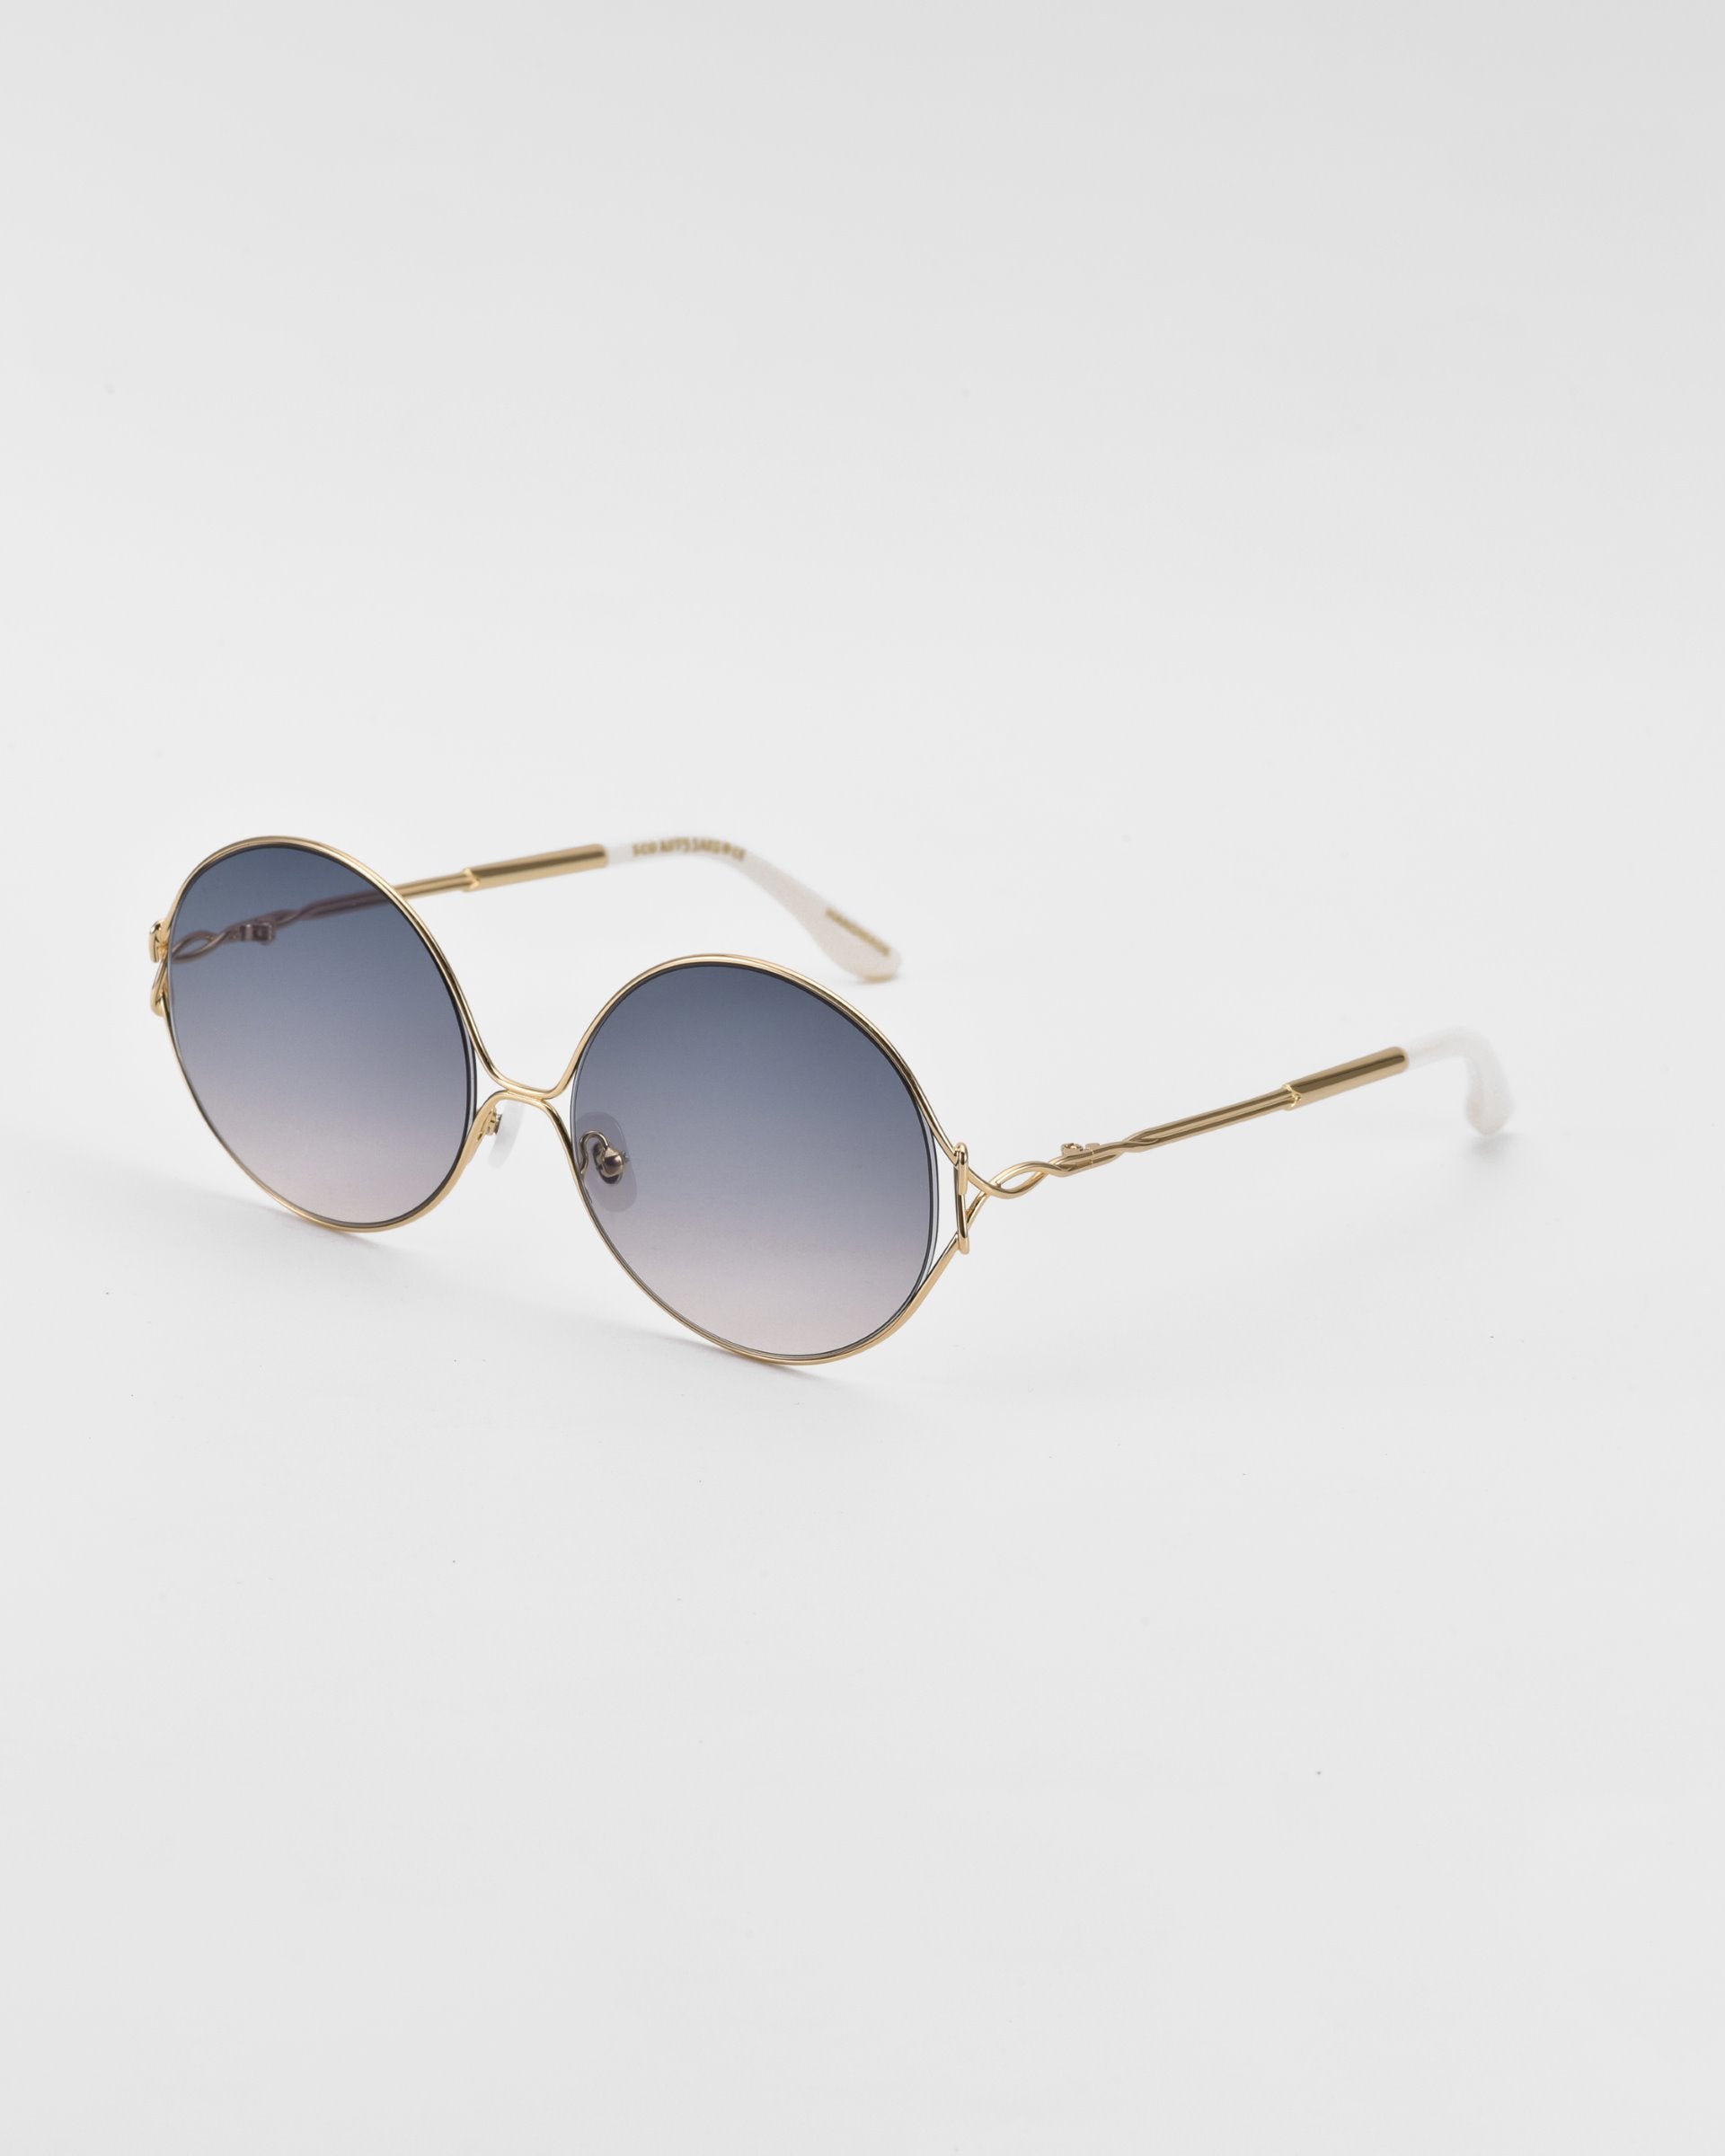 A pair of retro-inspired Aura sunglasses by For Art&#39;s Sake® with oversized round frames in gold metal and gradient blue lenses. The Aura sunglasses have thin temples with white tips and a minimal design against a plain white background.